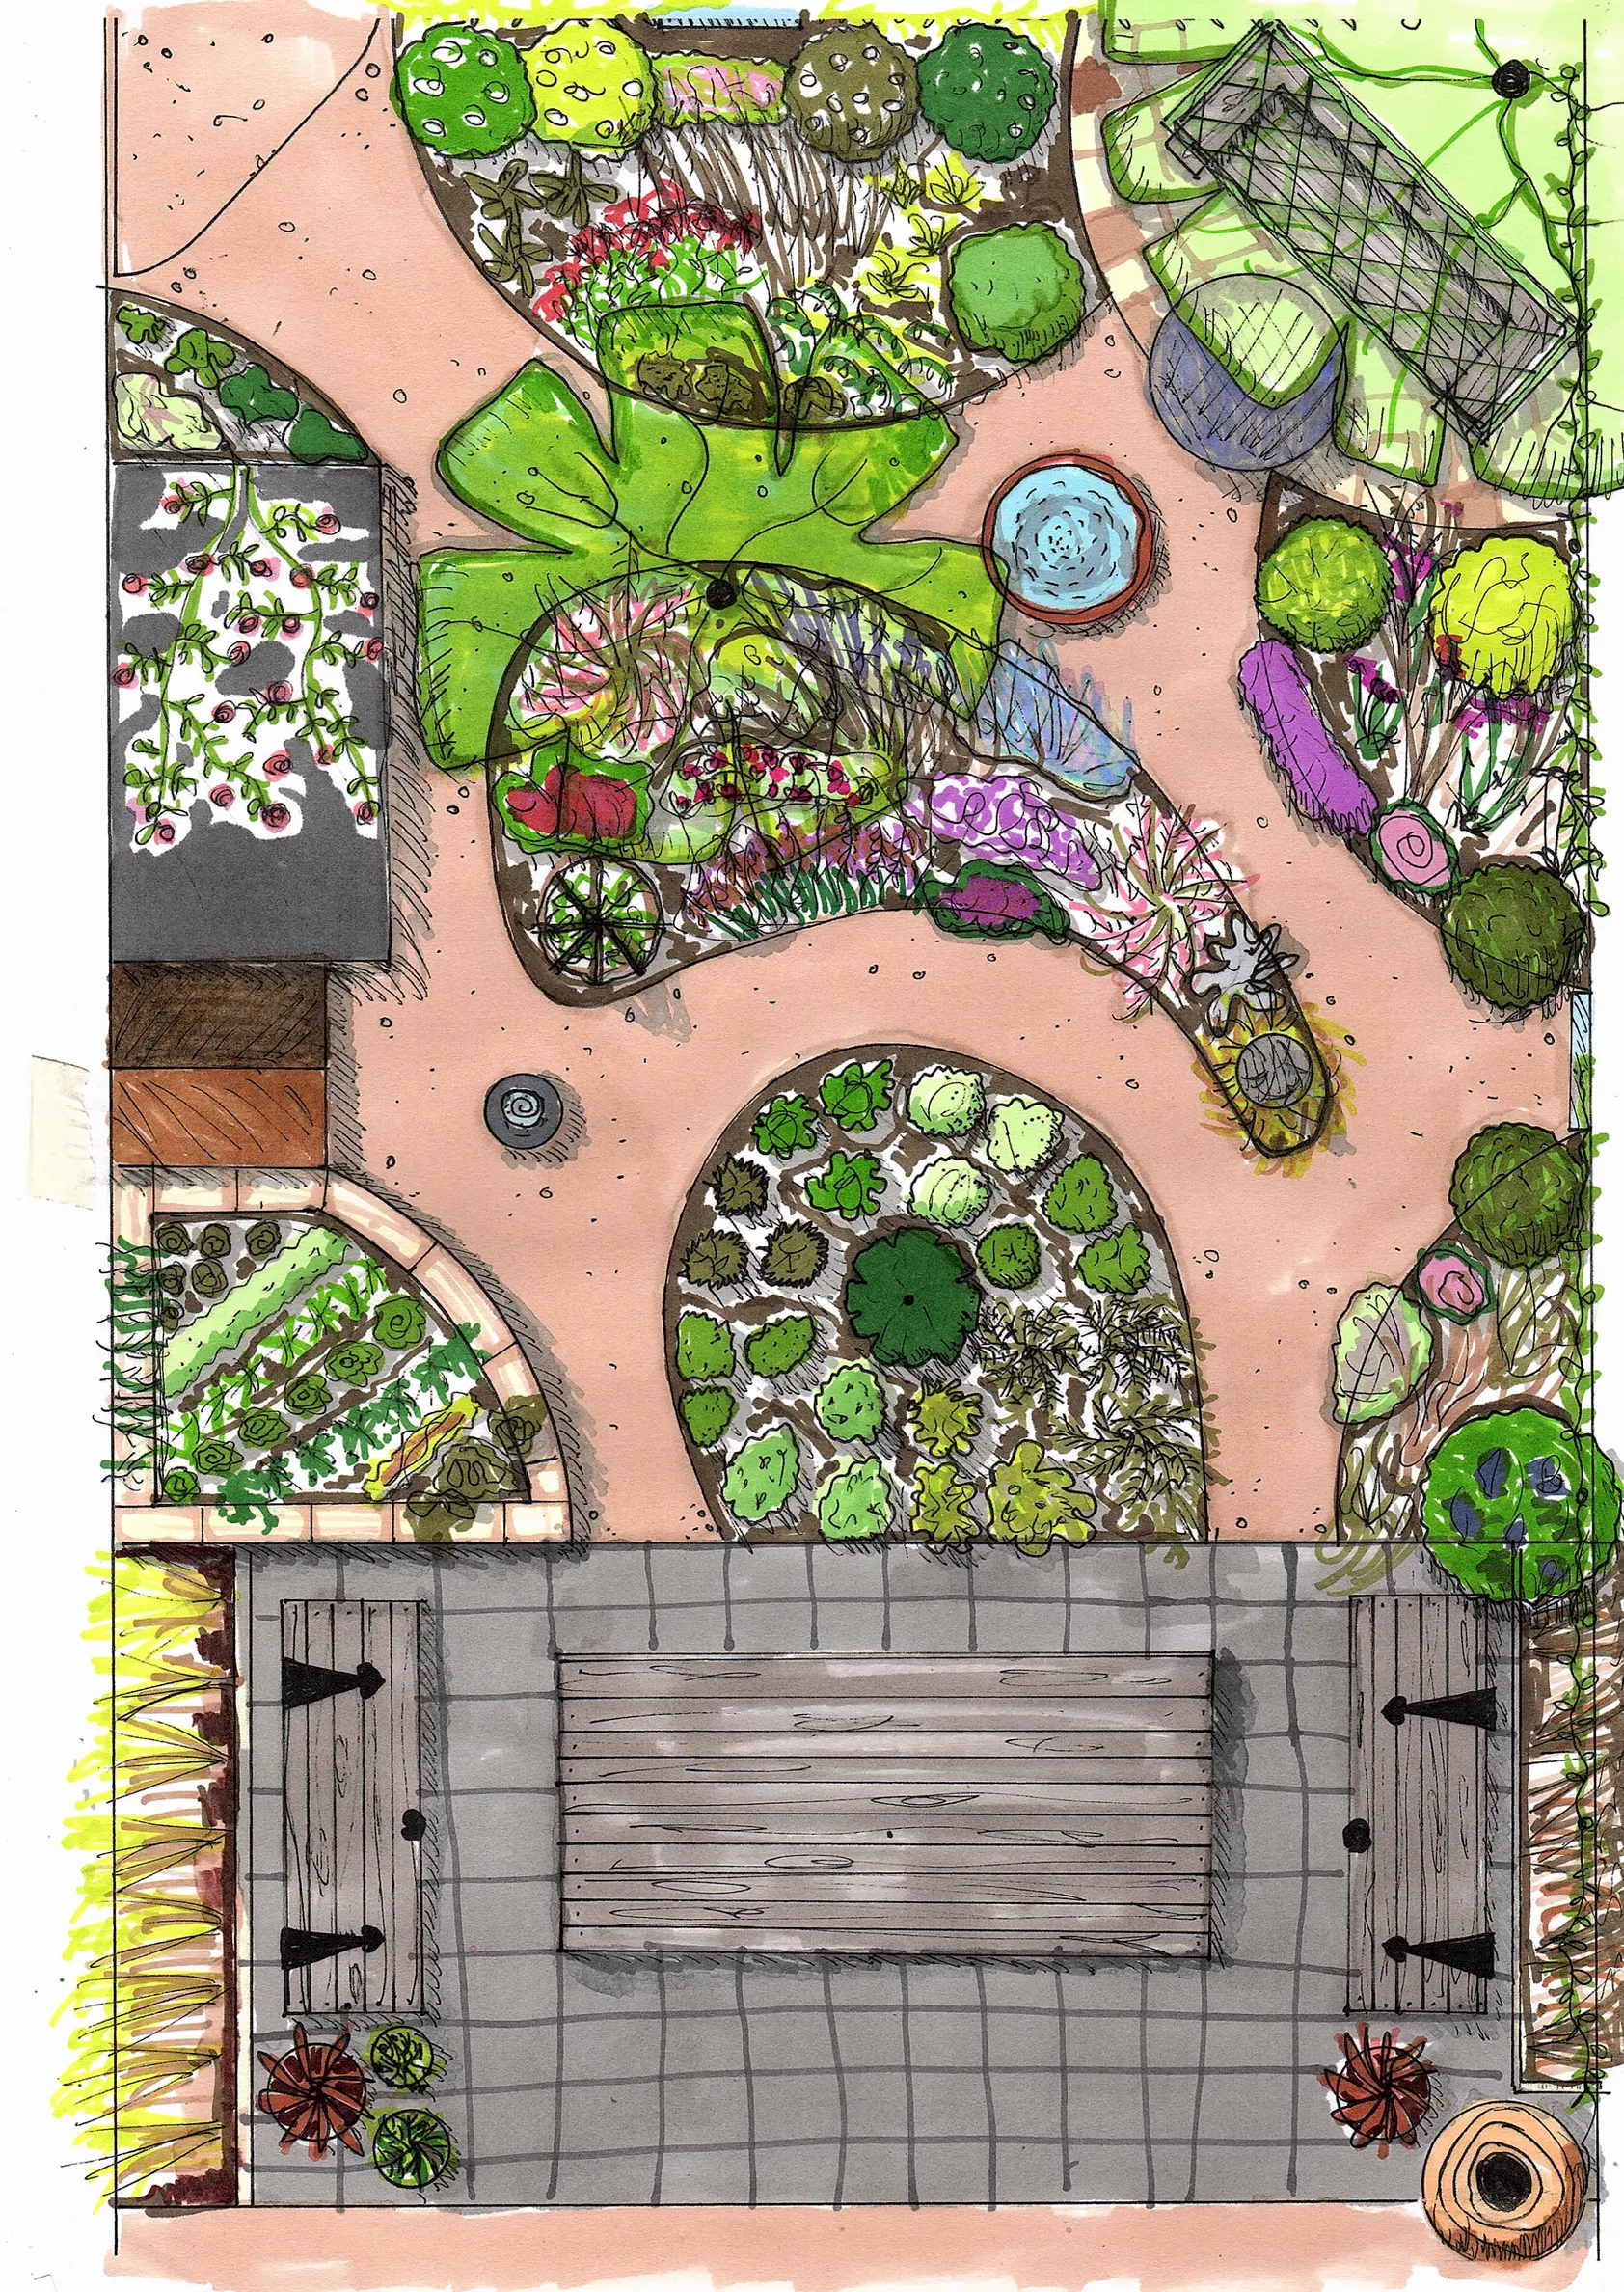 The design of the garden and the shape of the beds